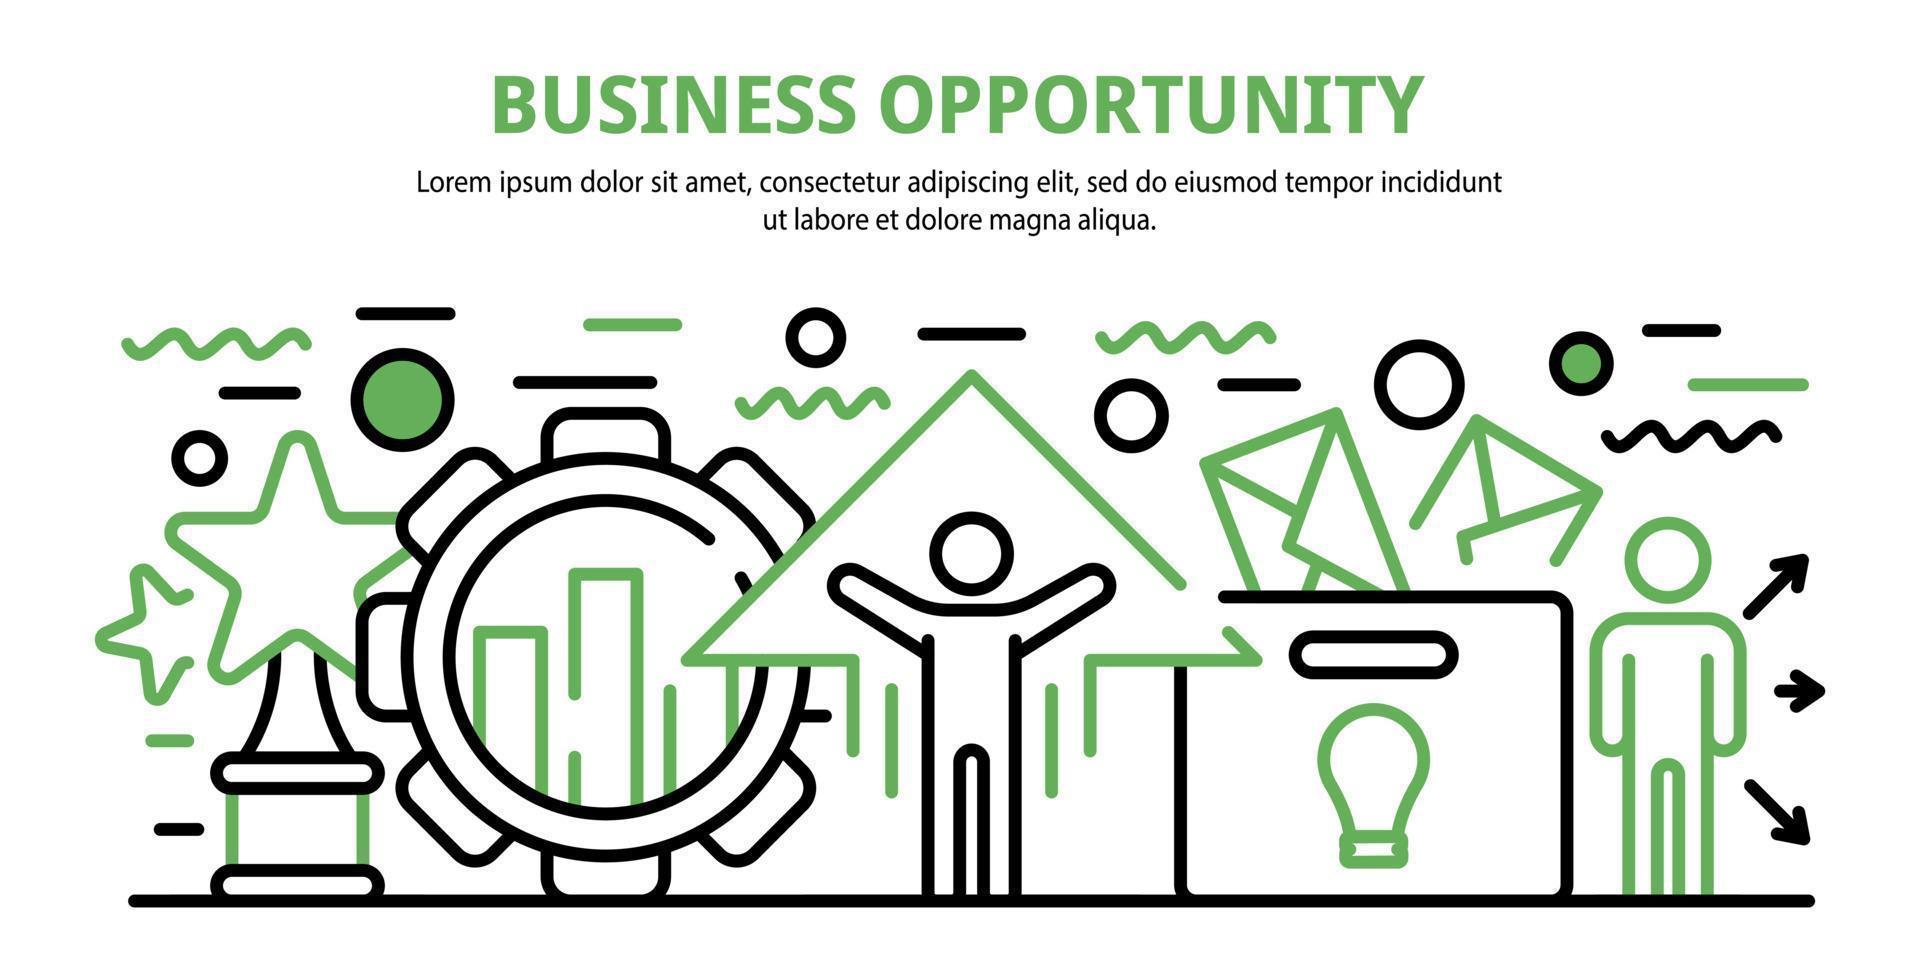 Business opportunity concept banner, cartoon style vector